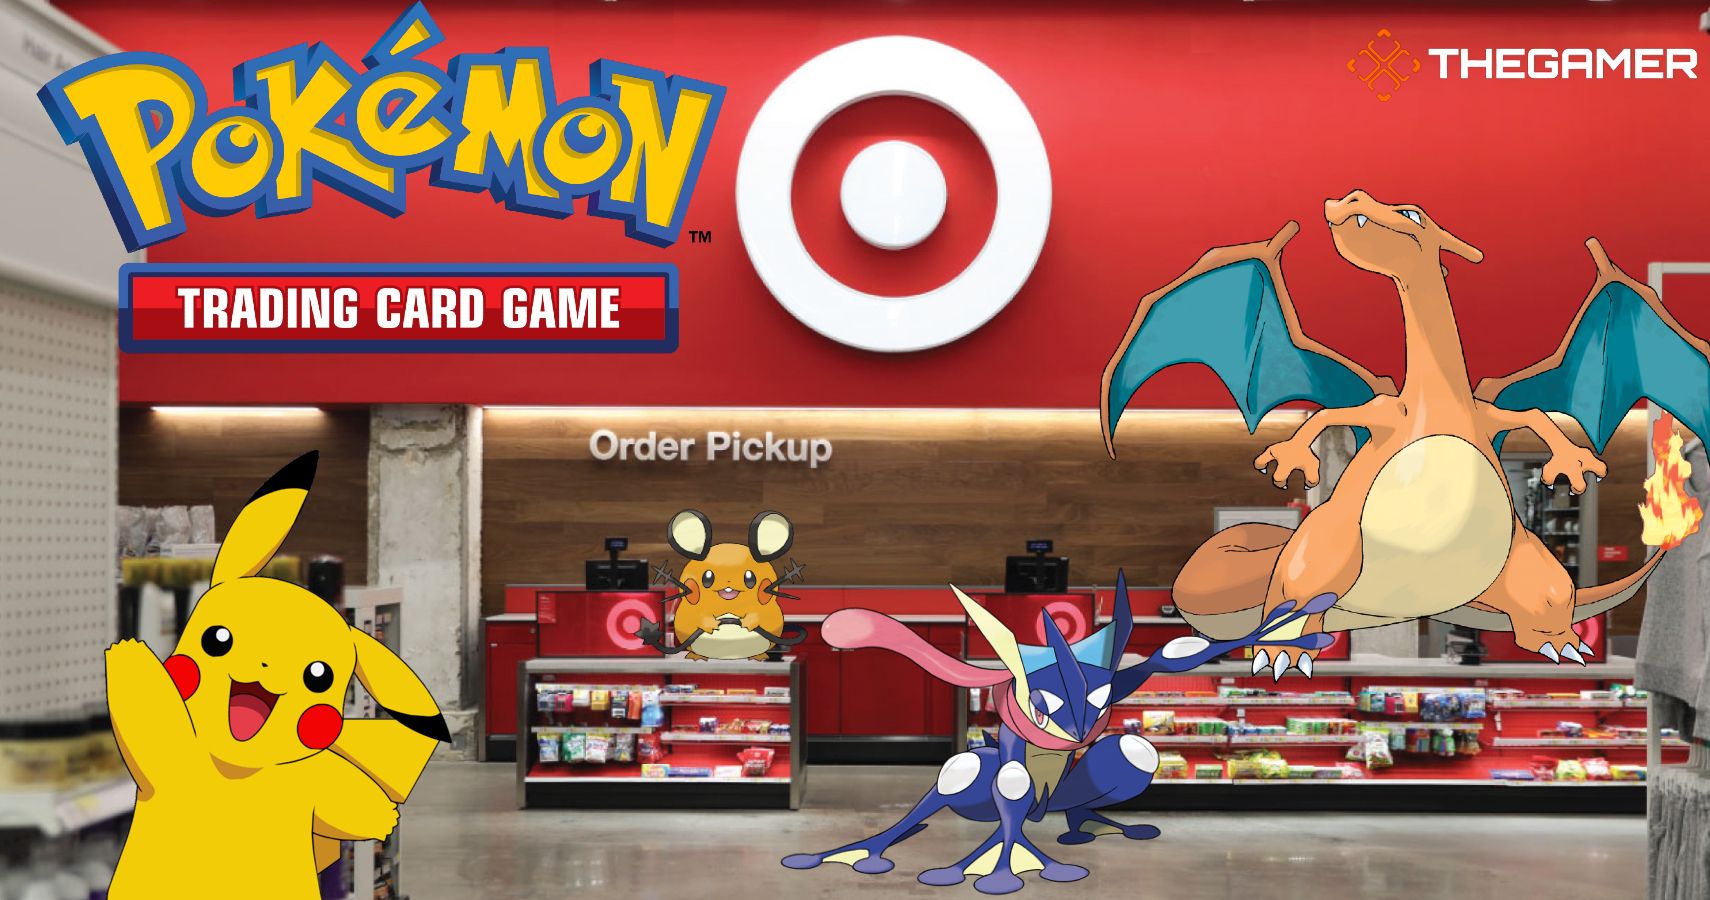 Target to resume sale of Pokemon Cards